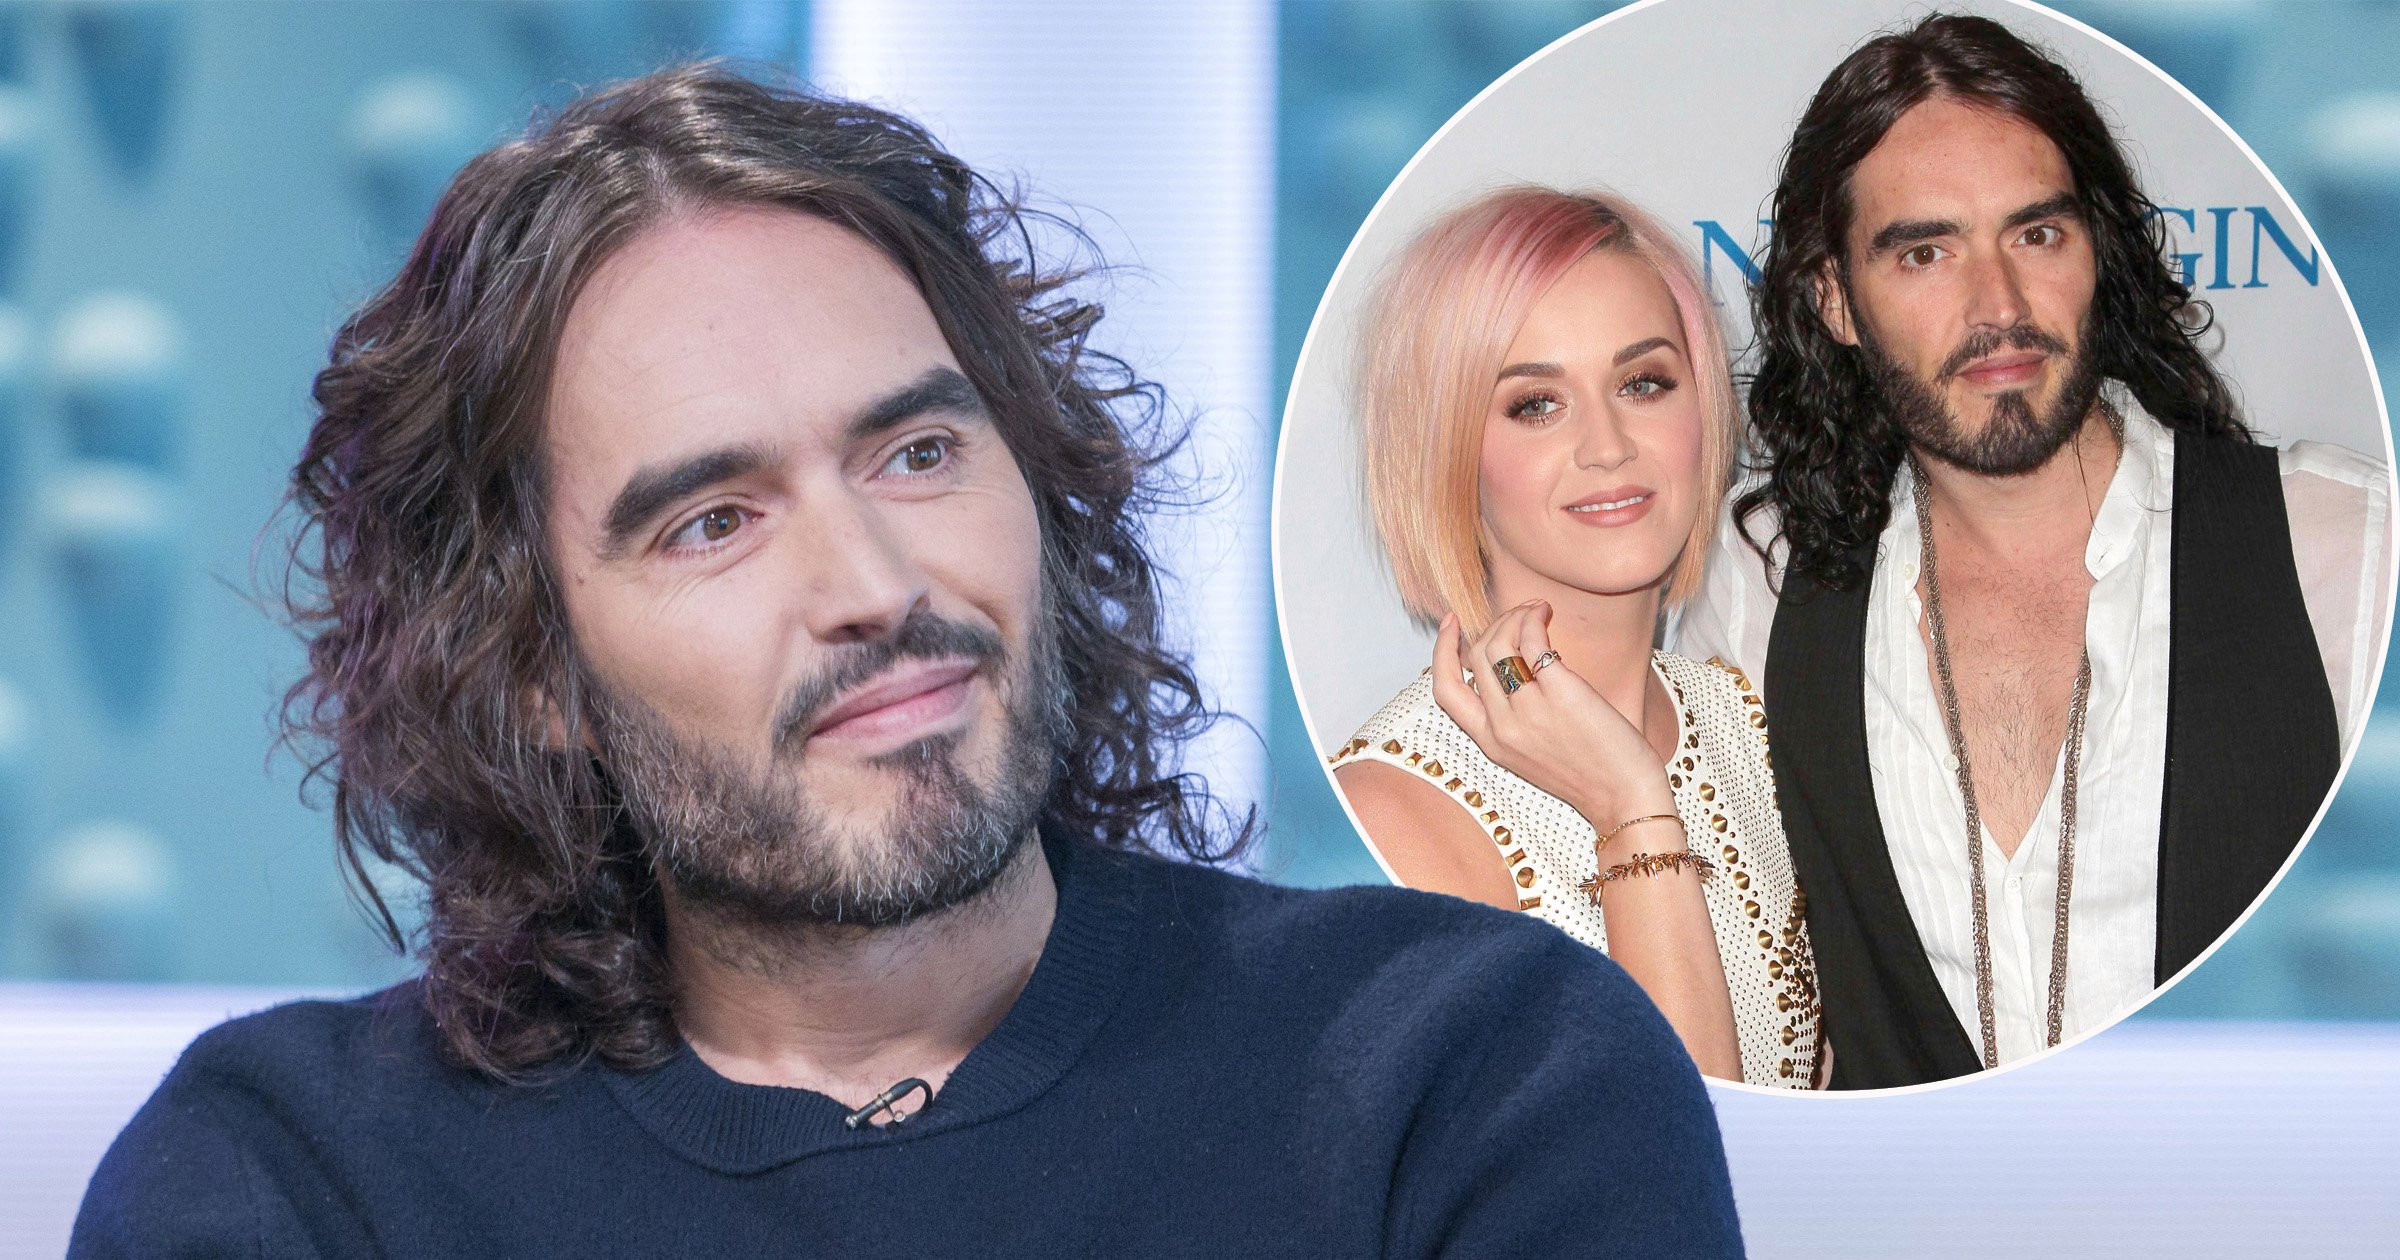 Russell Brand insists he ‘really tried’ to make his marriage with ex-wife Katy Perry work